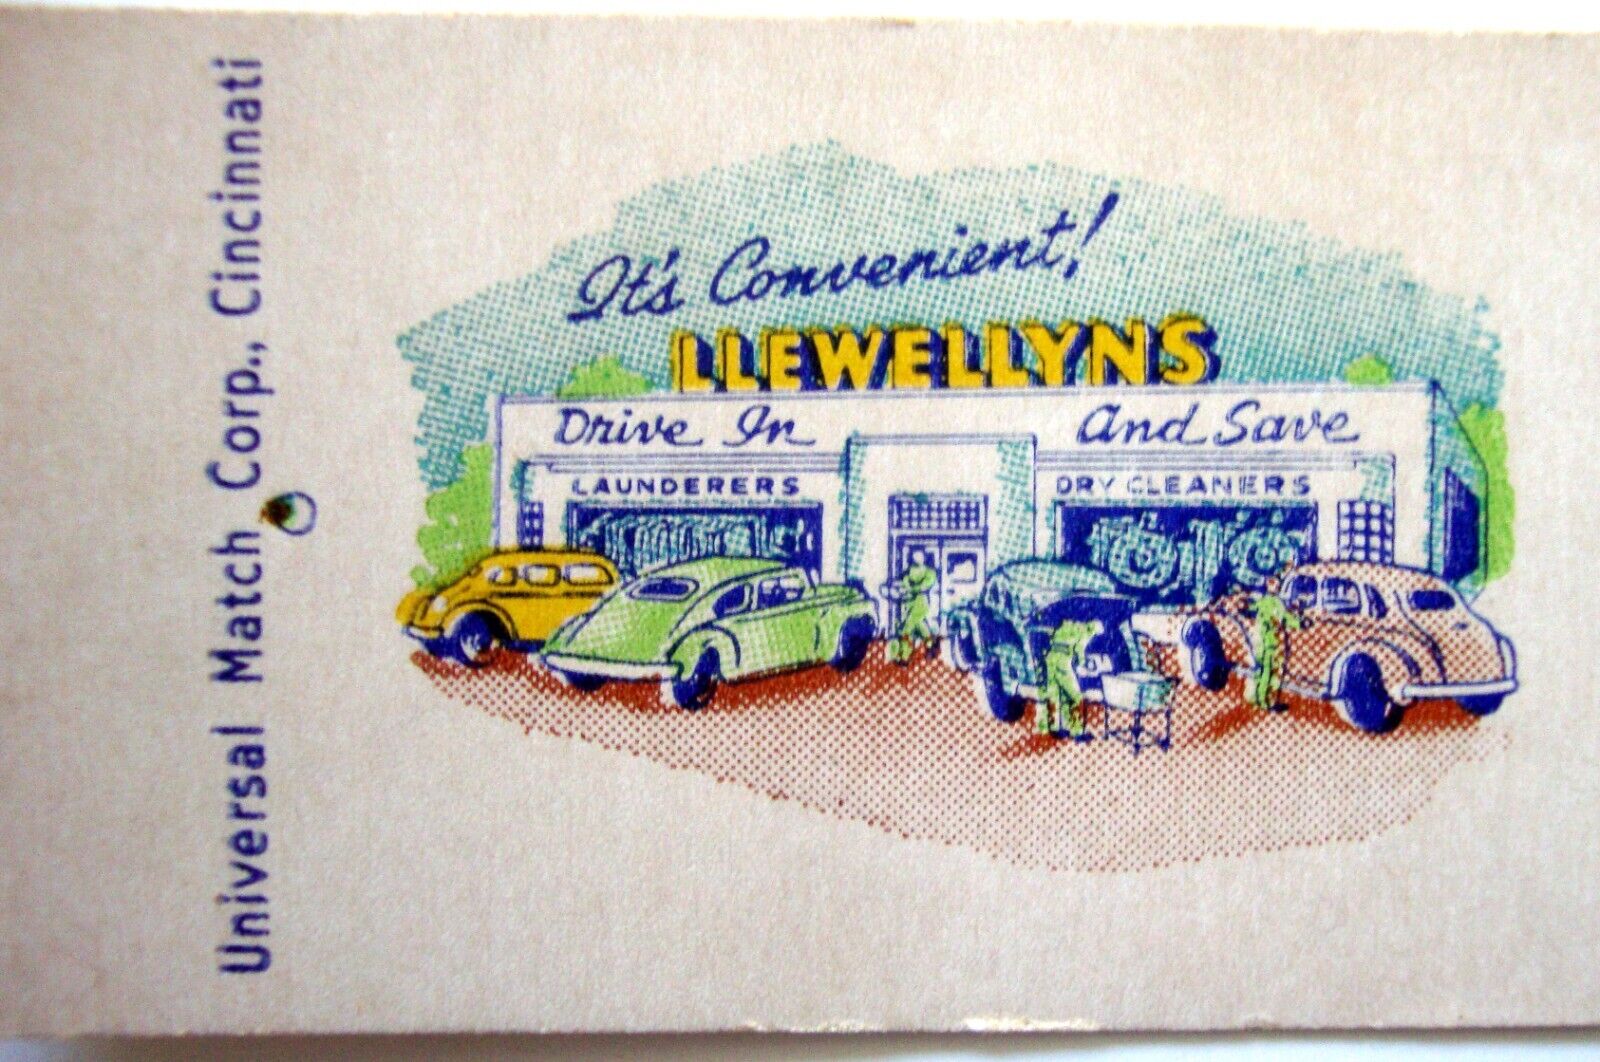 LLEWELLYN'S LAUNDERERS LOUISVILLE KY   SAMPLE MATCHCOVER